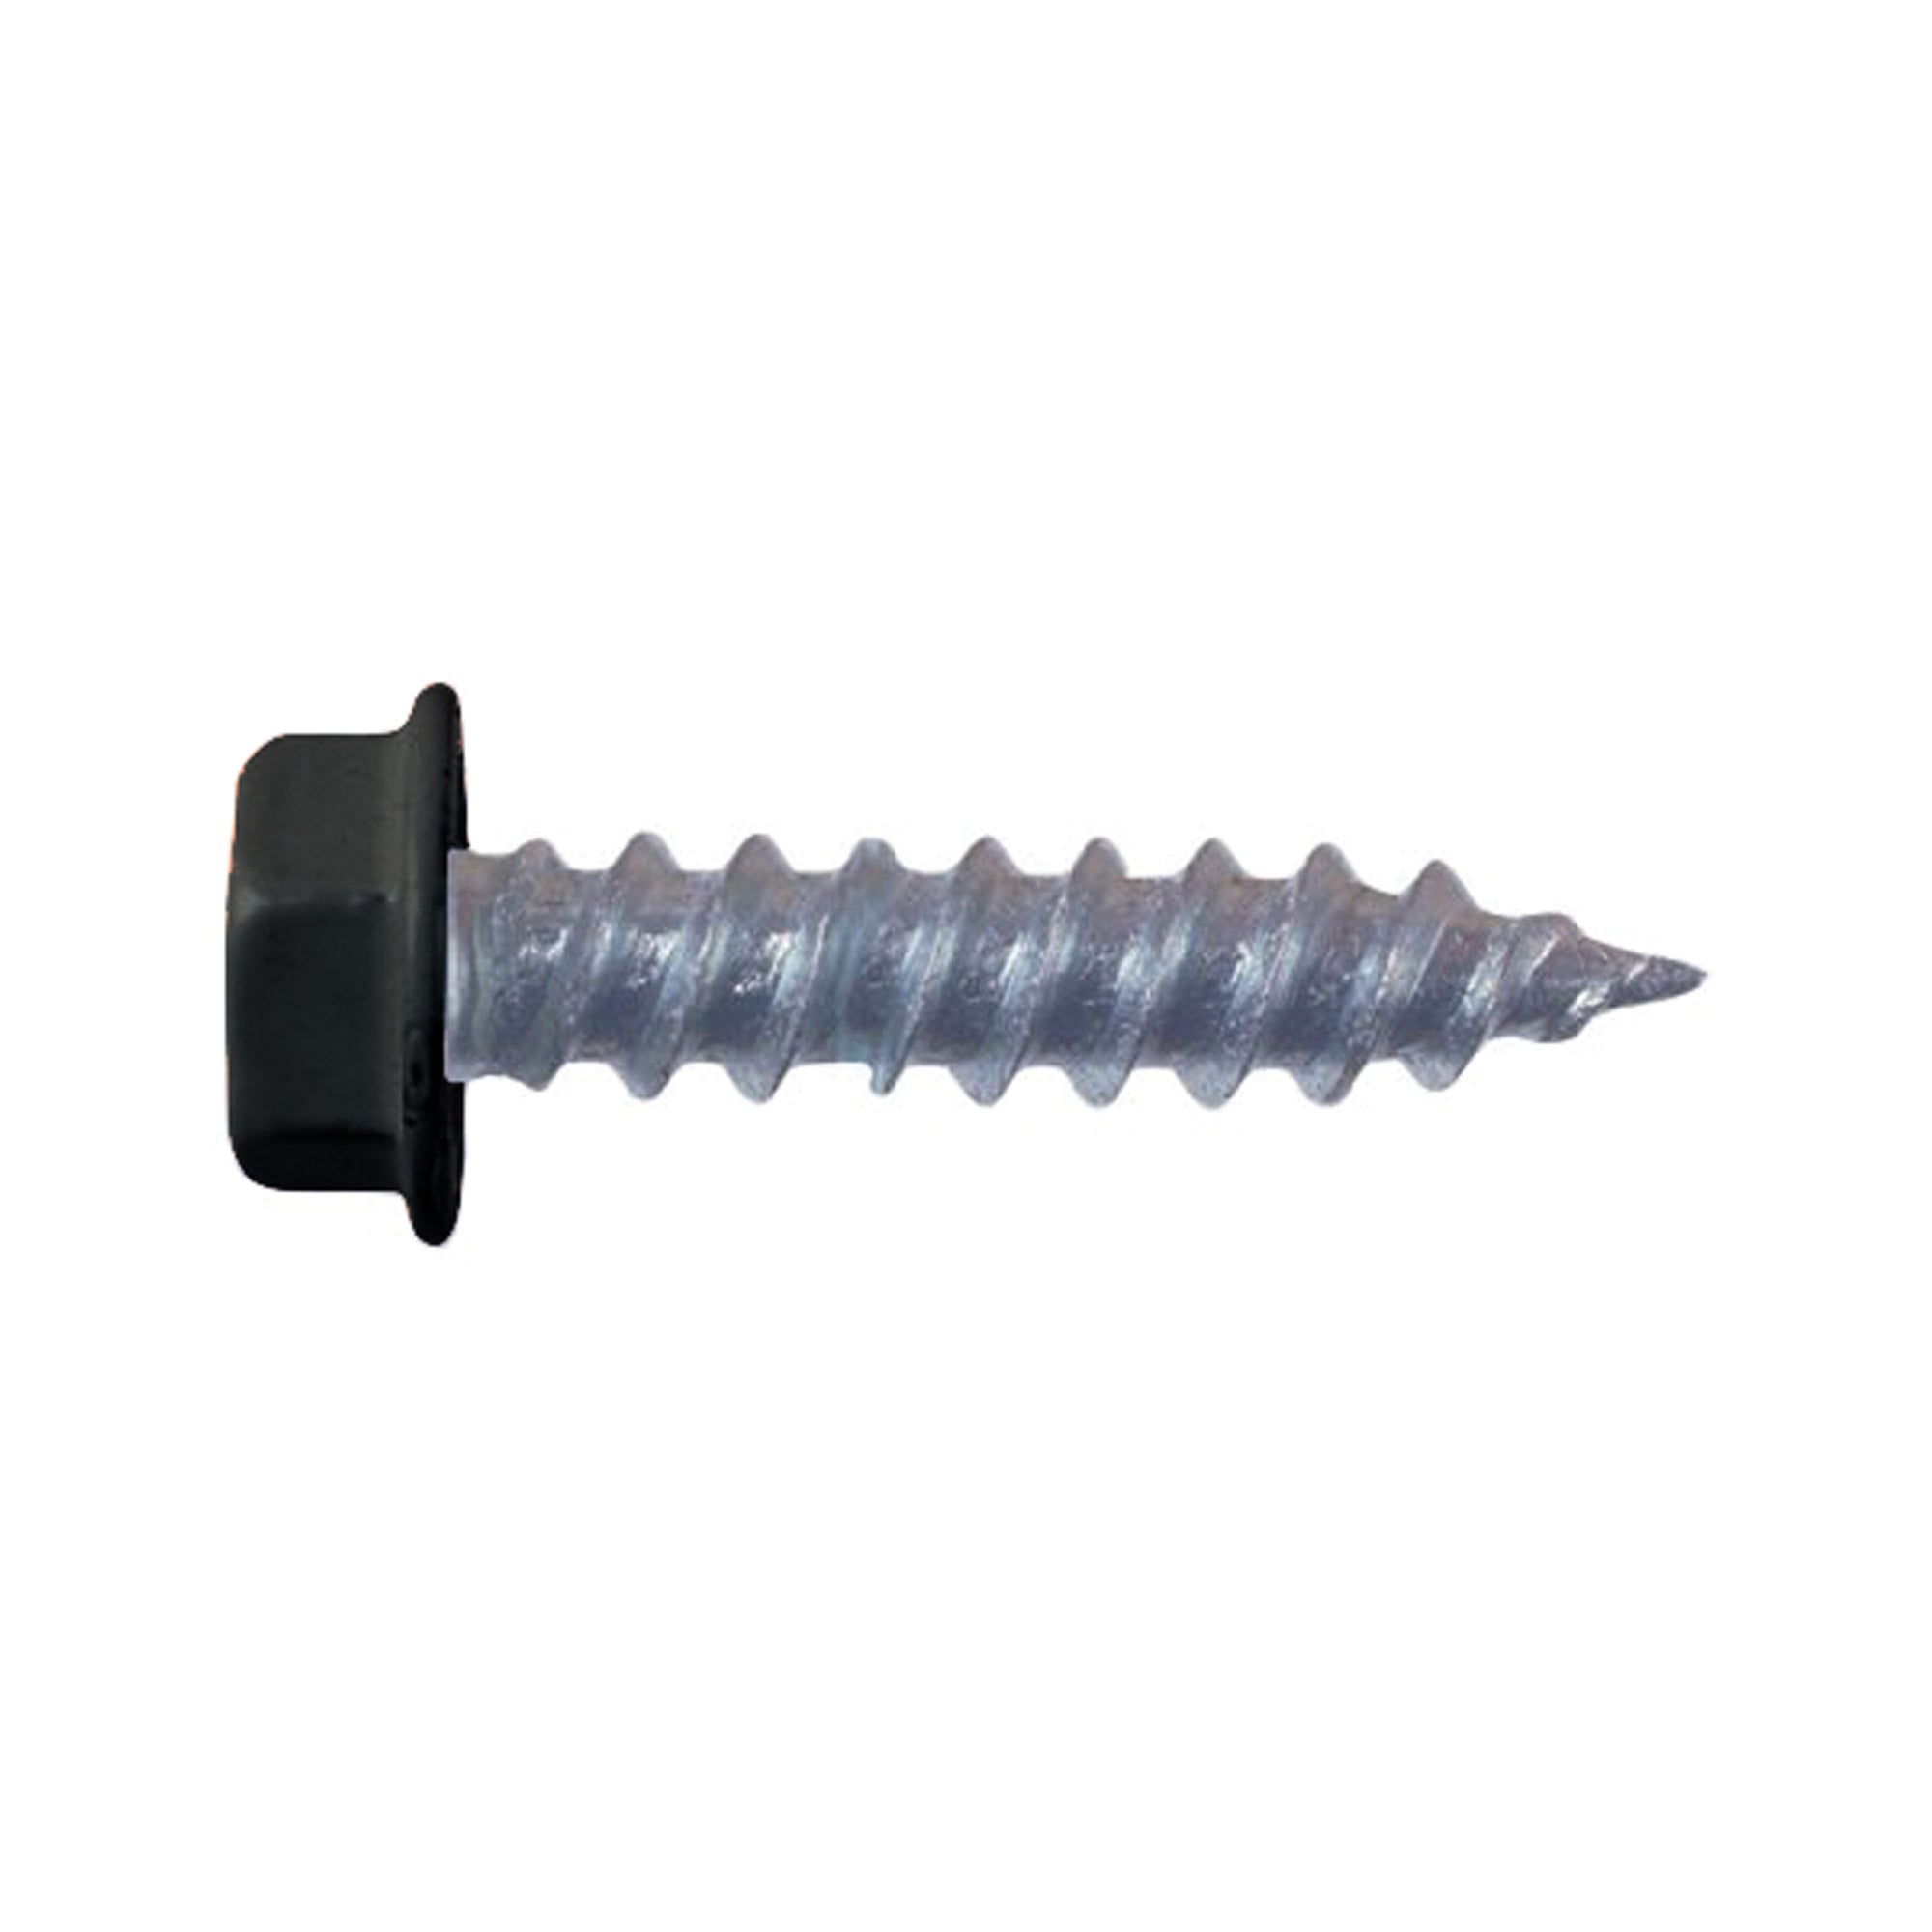 AP Products 012-TR500 BL 8 x 1-1/4 Hex Washer Head Screw - #8 x 1.25", Black, Pack of 500